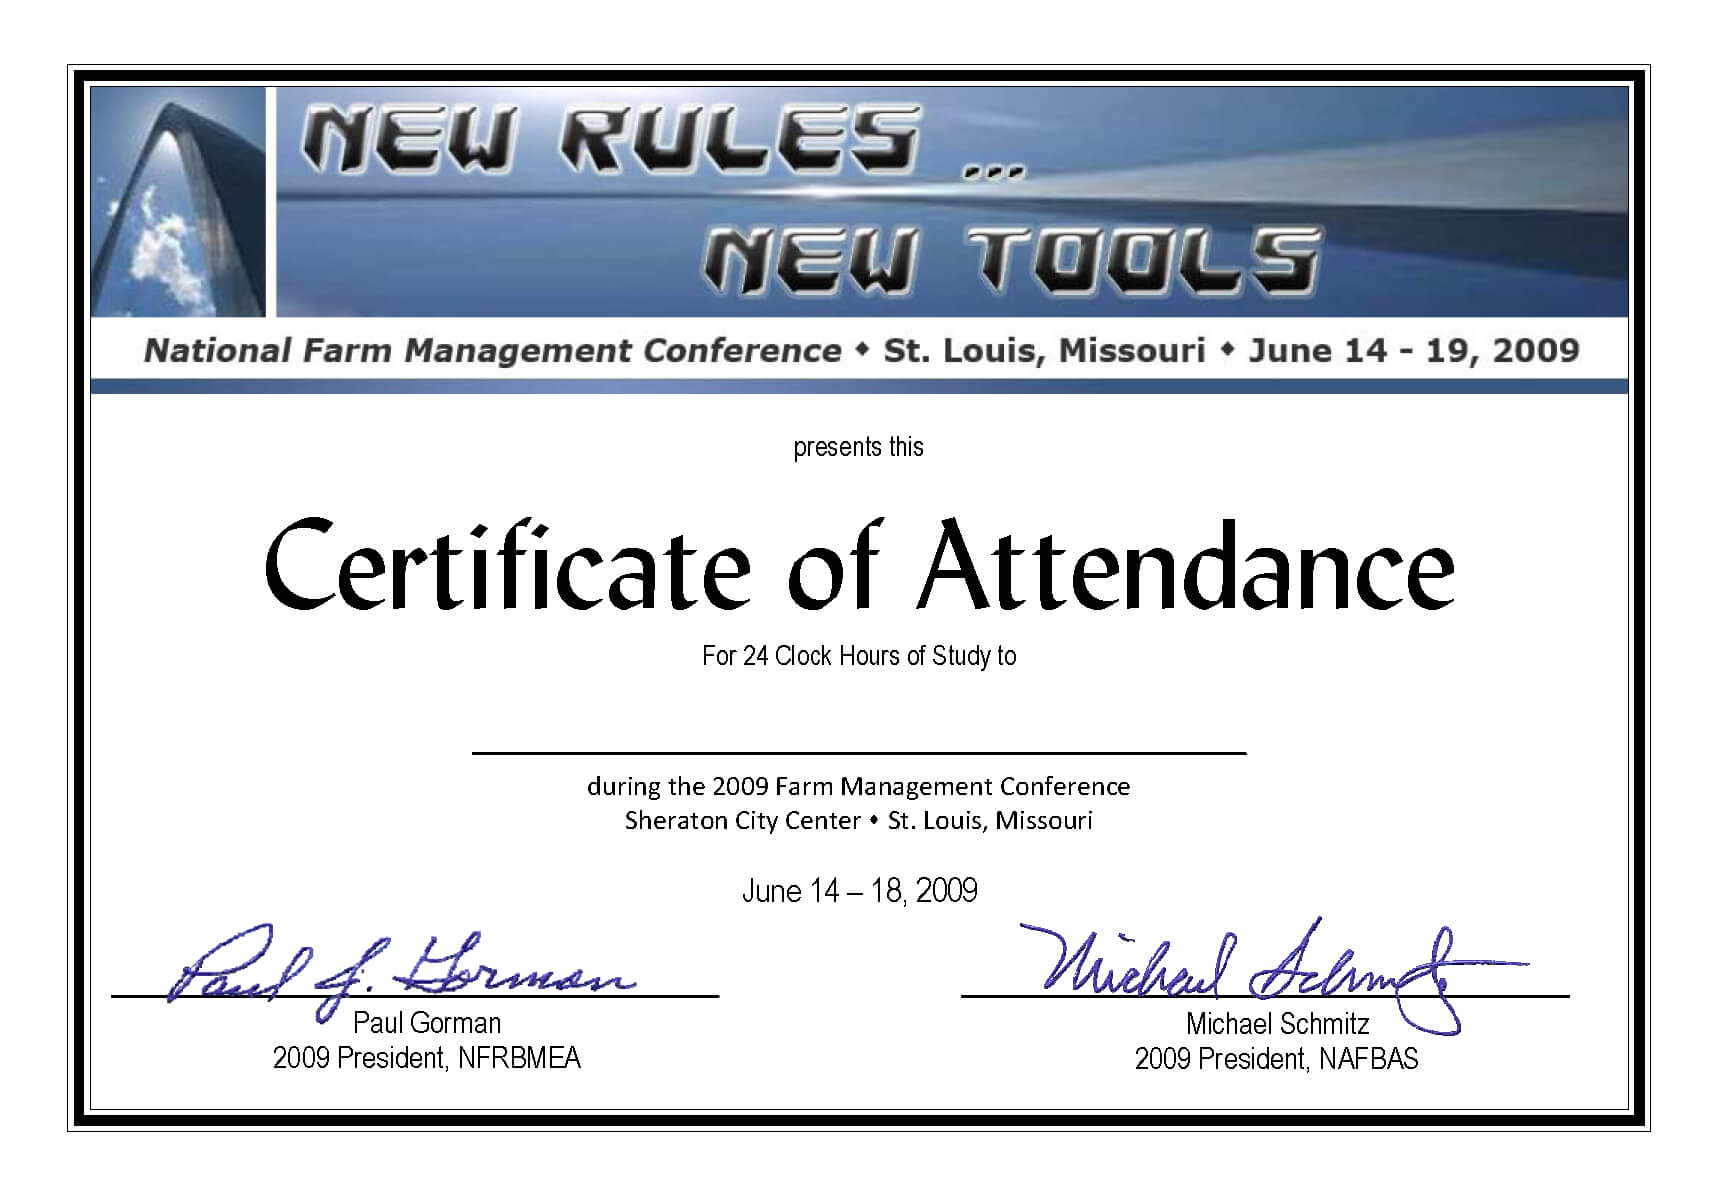 Conference Certificate Of Attendance Template - Great Inside Certificate Of Attendance Conference Template